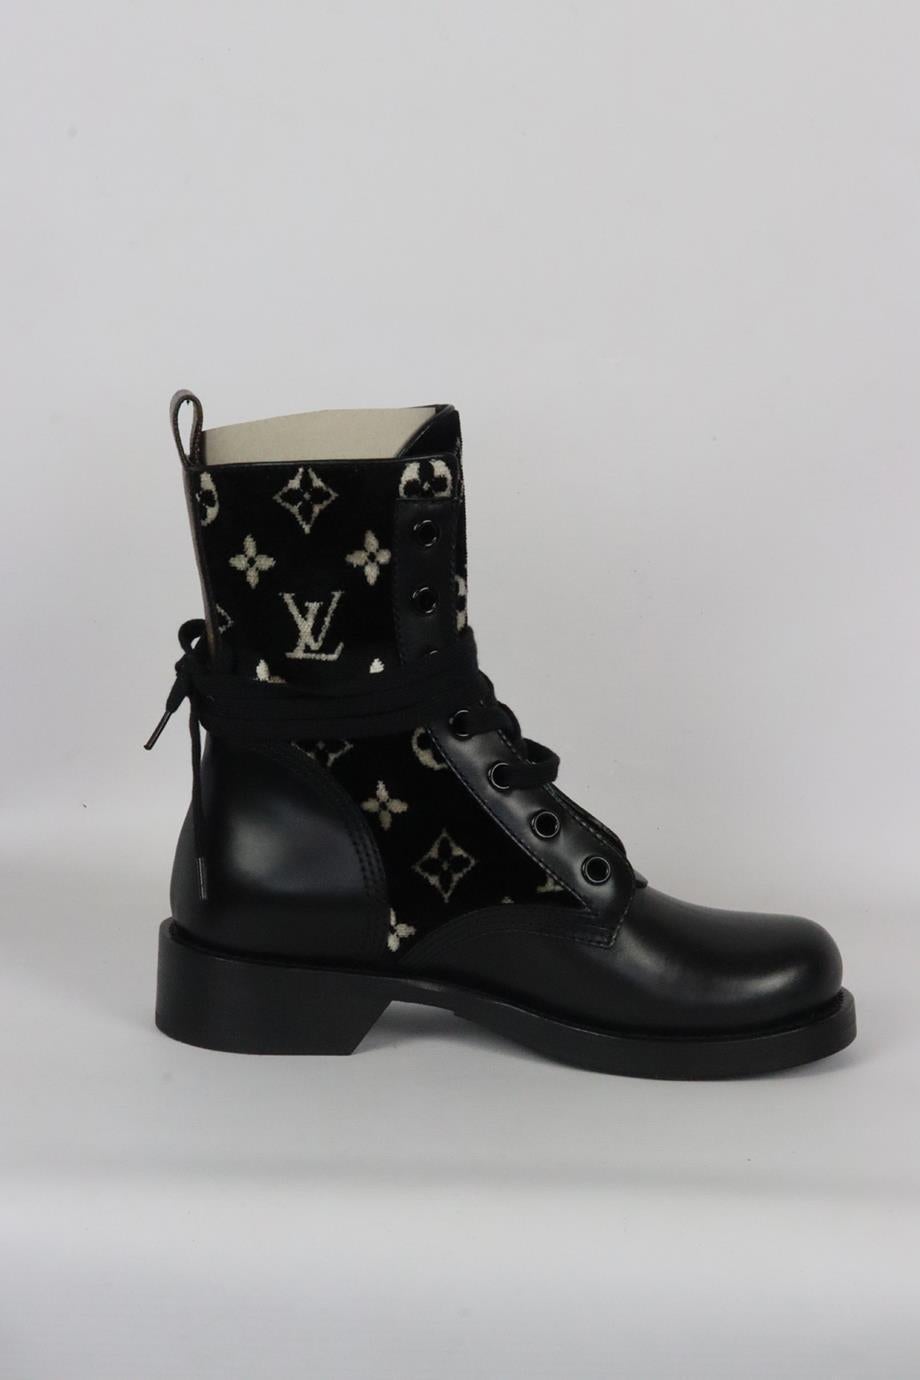 Louis Vuitton Metropolis monogrammed velvet and leather ankle boots. Black, white and brown. Lace up fastening at front. Does not come with dustbag or box. Size: EU 38 (UK 5, US 8). Insole: 9.8 in. Heel Height: 1.4 in. Platform: 0.3 in. Shaft: 7 in.